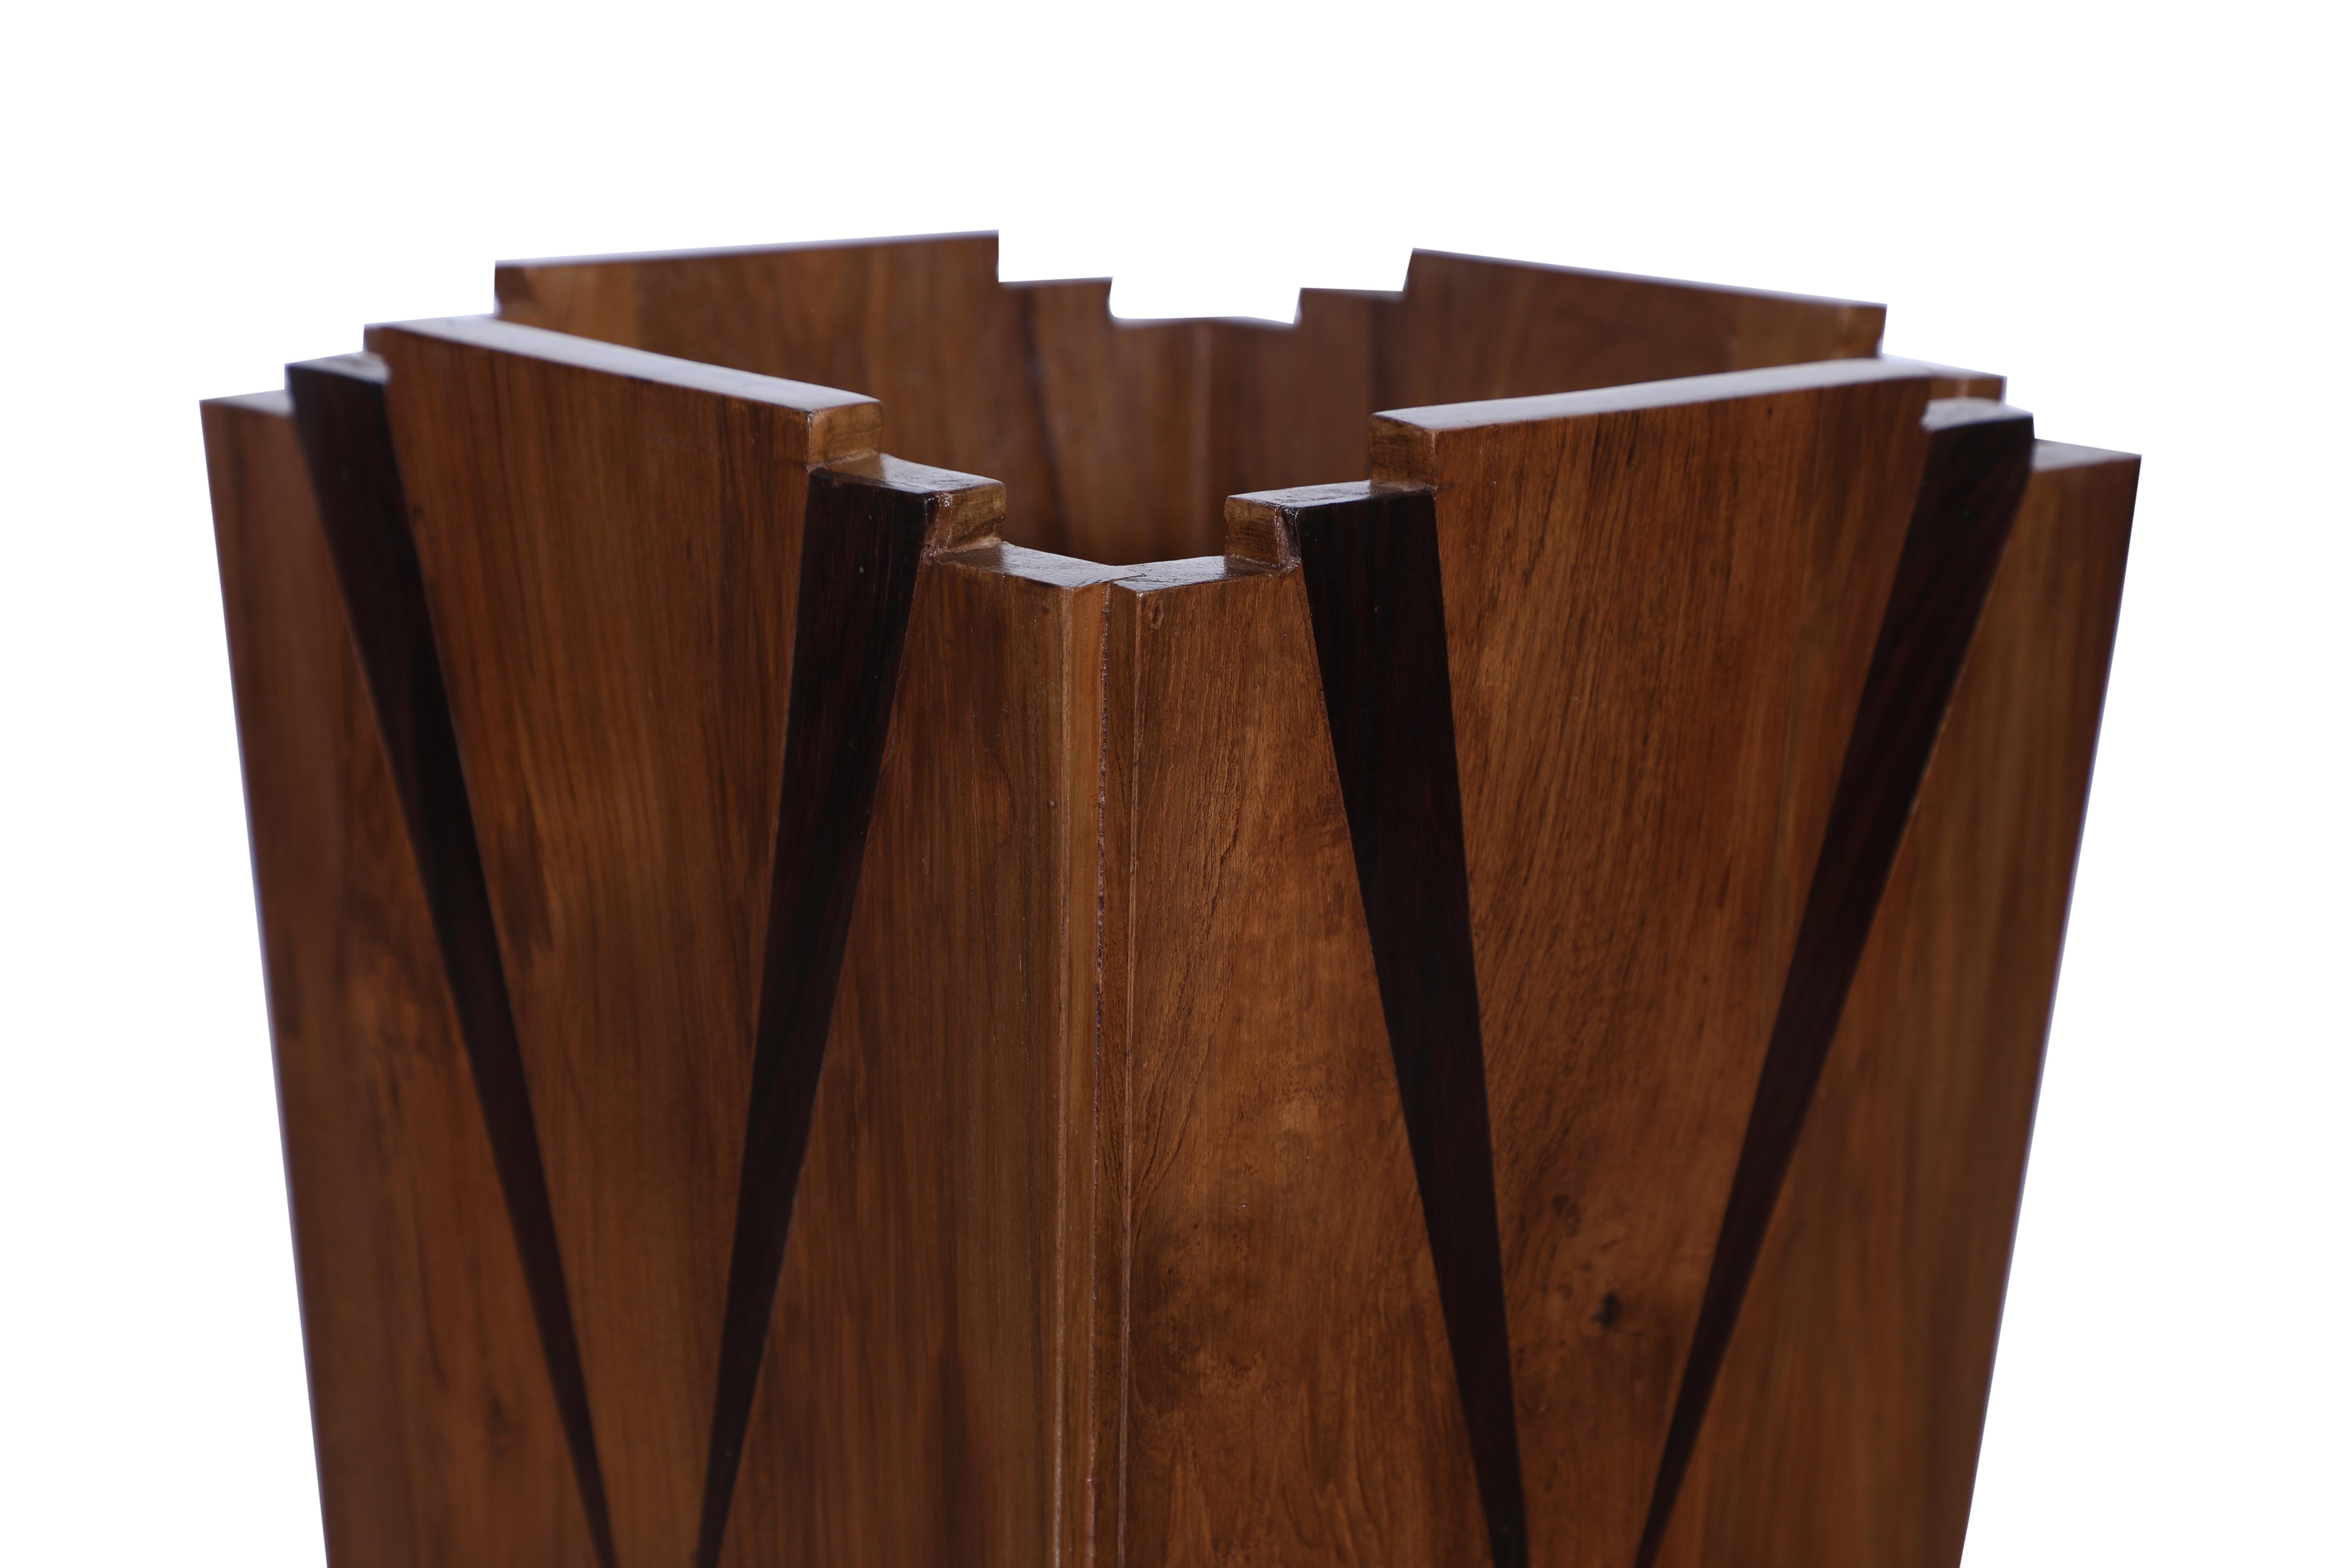 Teak Art Deco waste paper basket or use as a planter with details indicative of the era.  Tapered design with a stepped architectural top edge and rosewood inlay in a traditional chevron design.

The Lockhart Collection is a personally curated